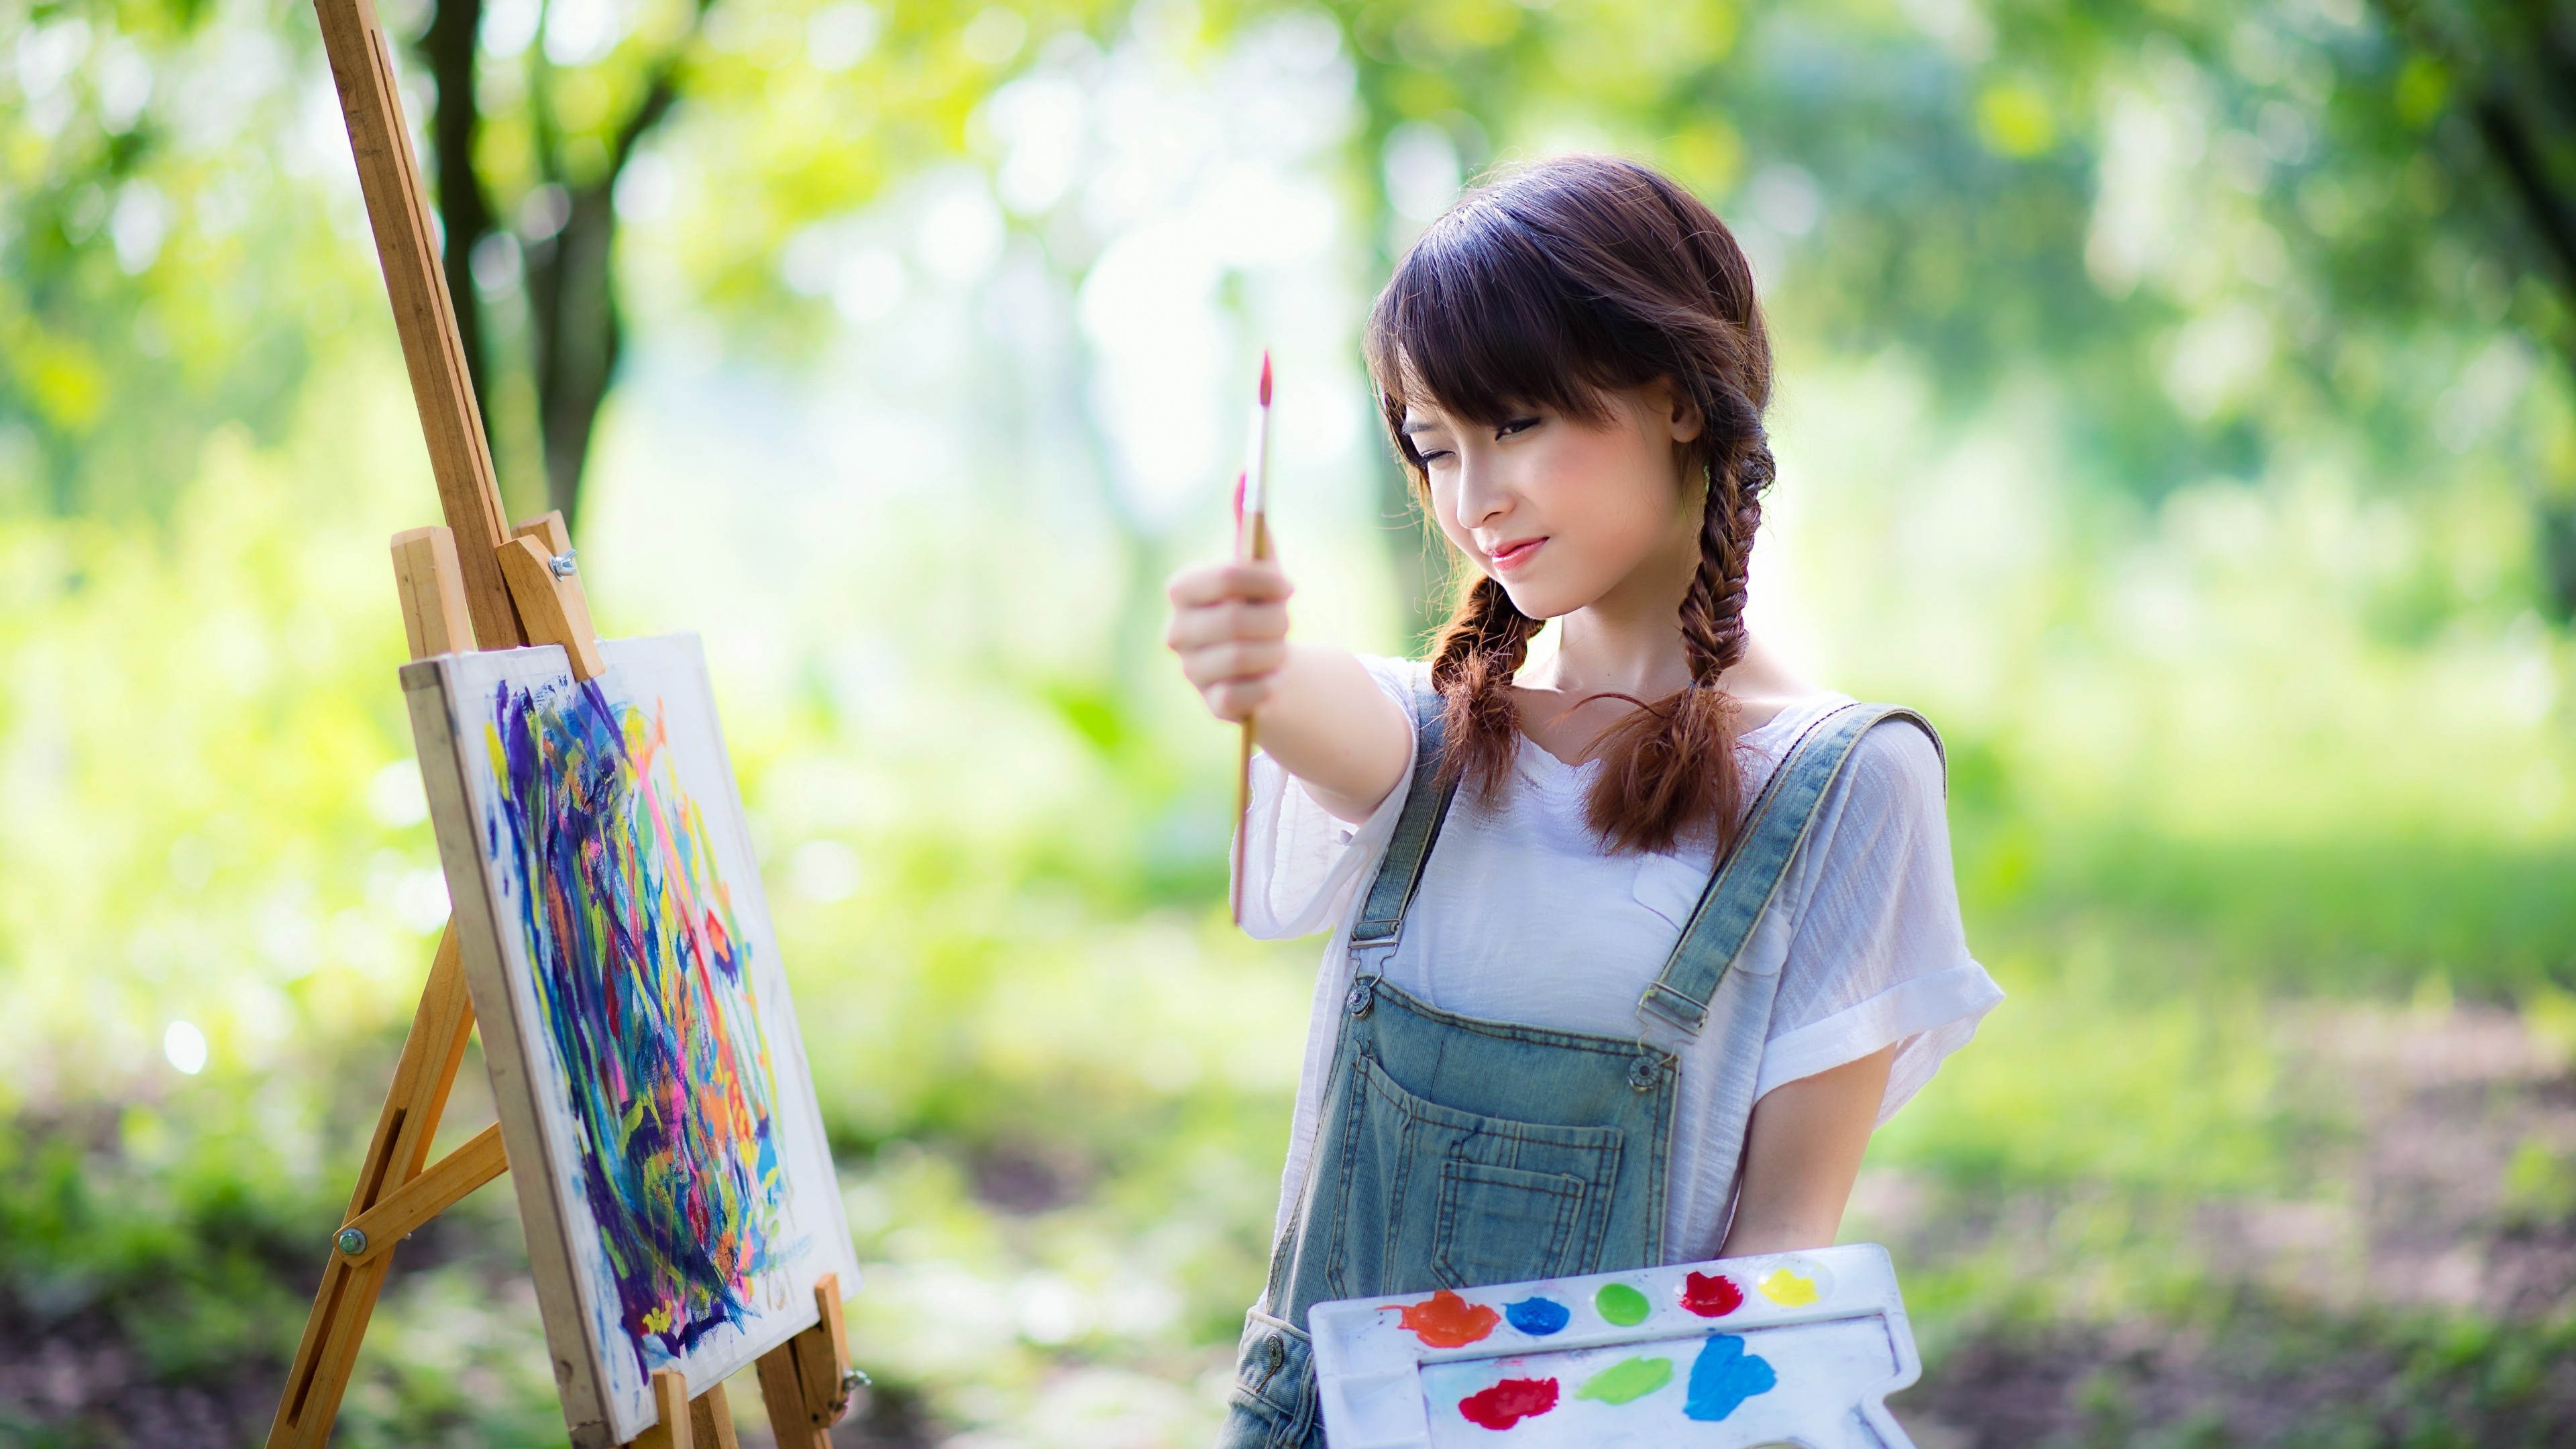 People 3840x2160 women brunette Asian long hair women outdoors painting painters nature jeans T-shirt trees depth of field abstract thumbs up easel twintails paint brushes outdoors